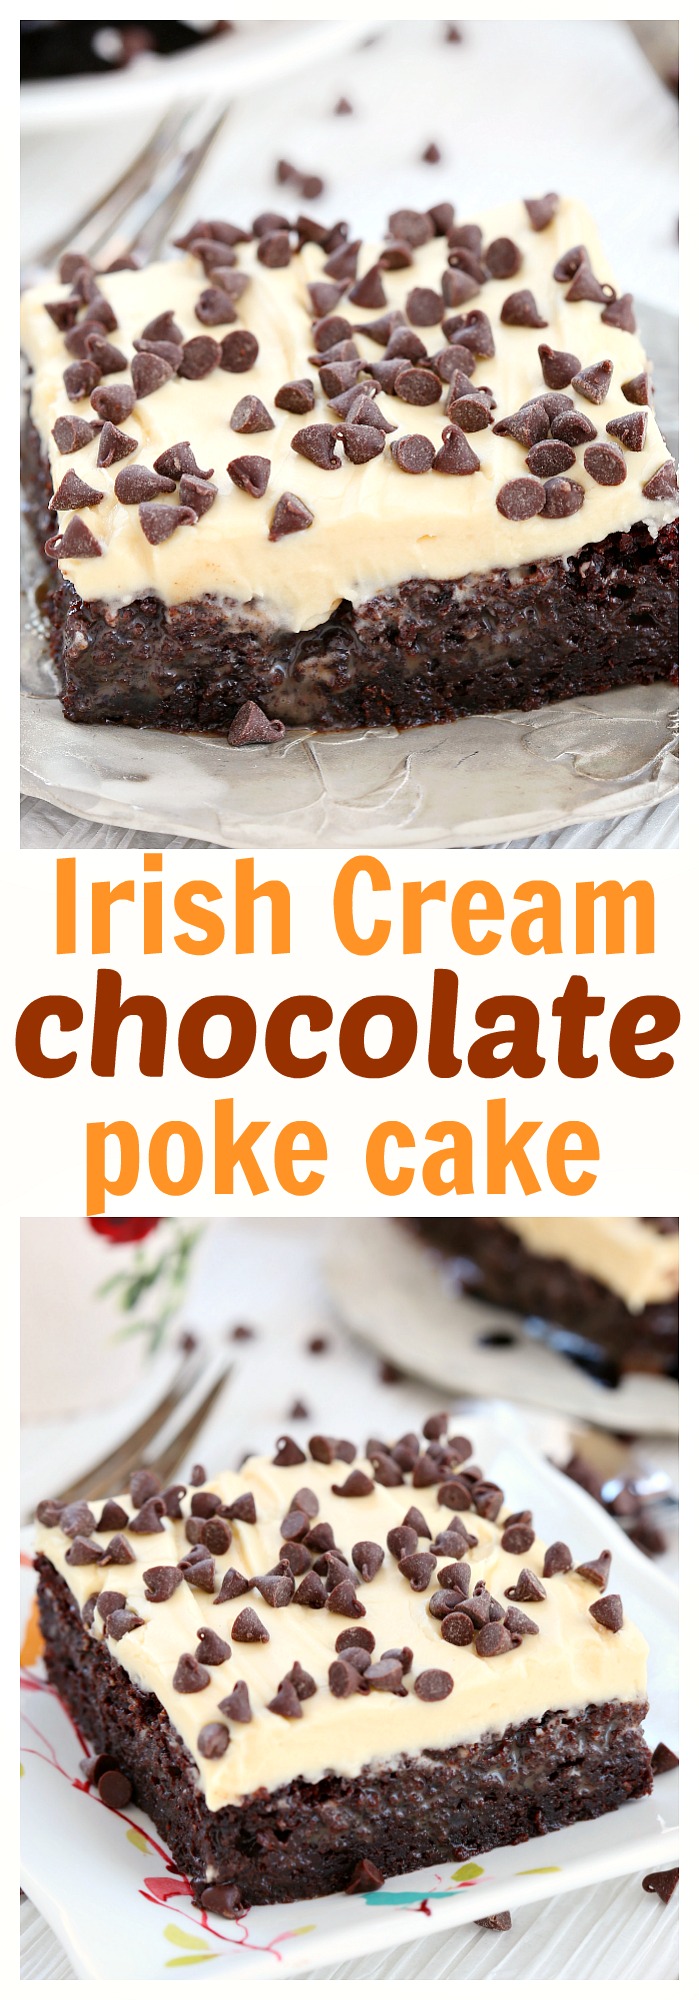 Rich Irish cream chocolate cake infused with chocolate condensed milk and topped with a dreamy Irish cream frosting, this Irish cream chocolate poke cake will knock your socks off!